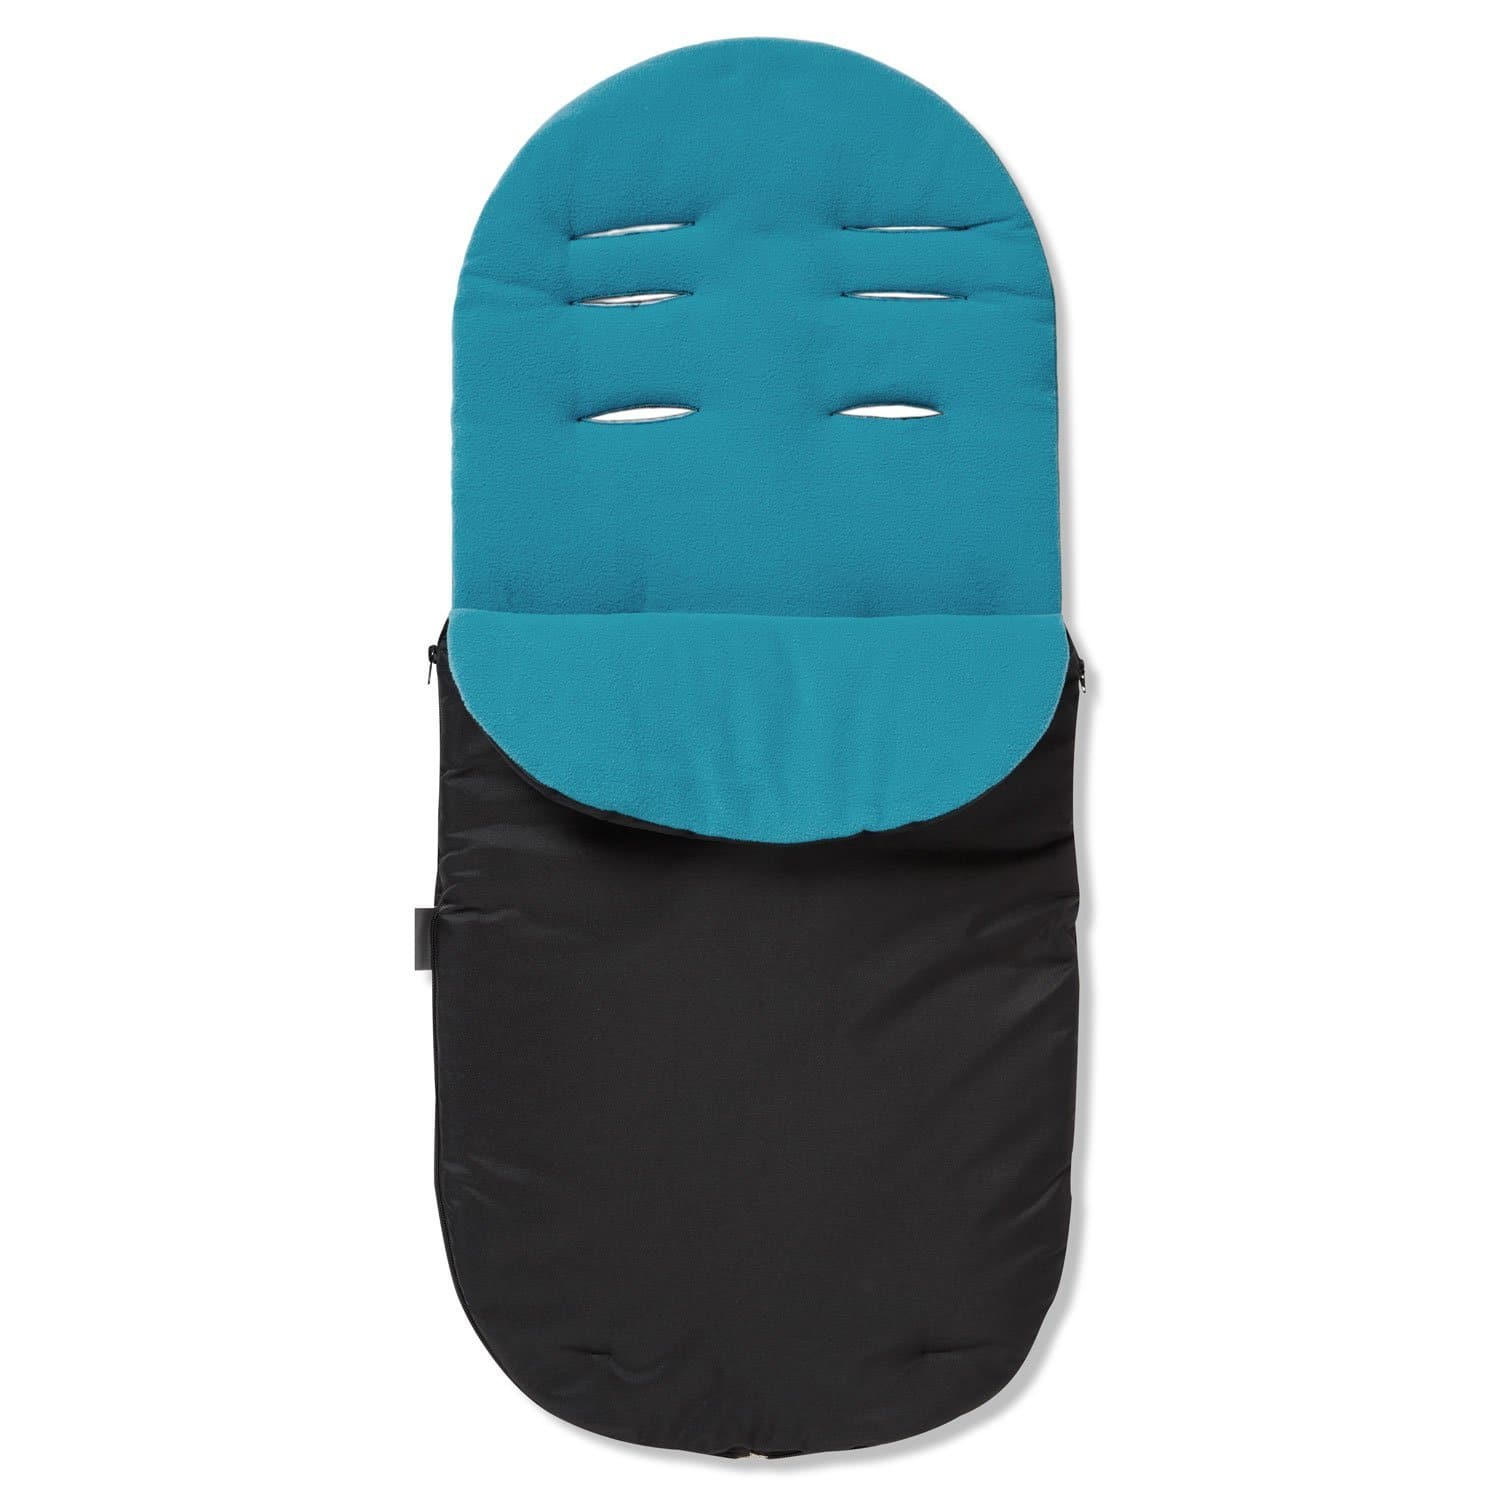 Footmuff / Cosy Toes Compatible with Kiddicouture - Turquoise / Fits All Models | For Your Little One